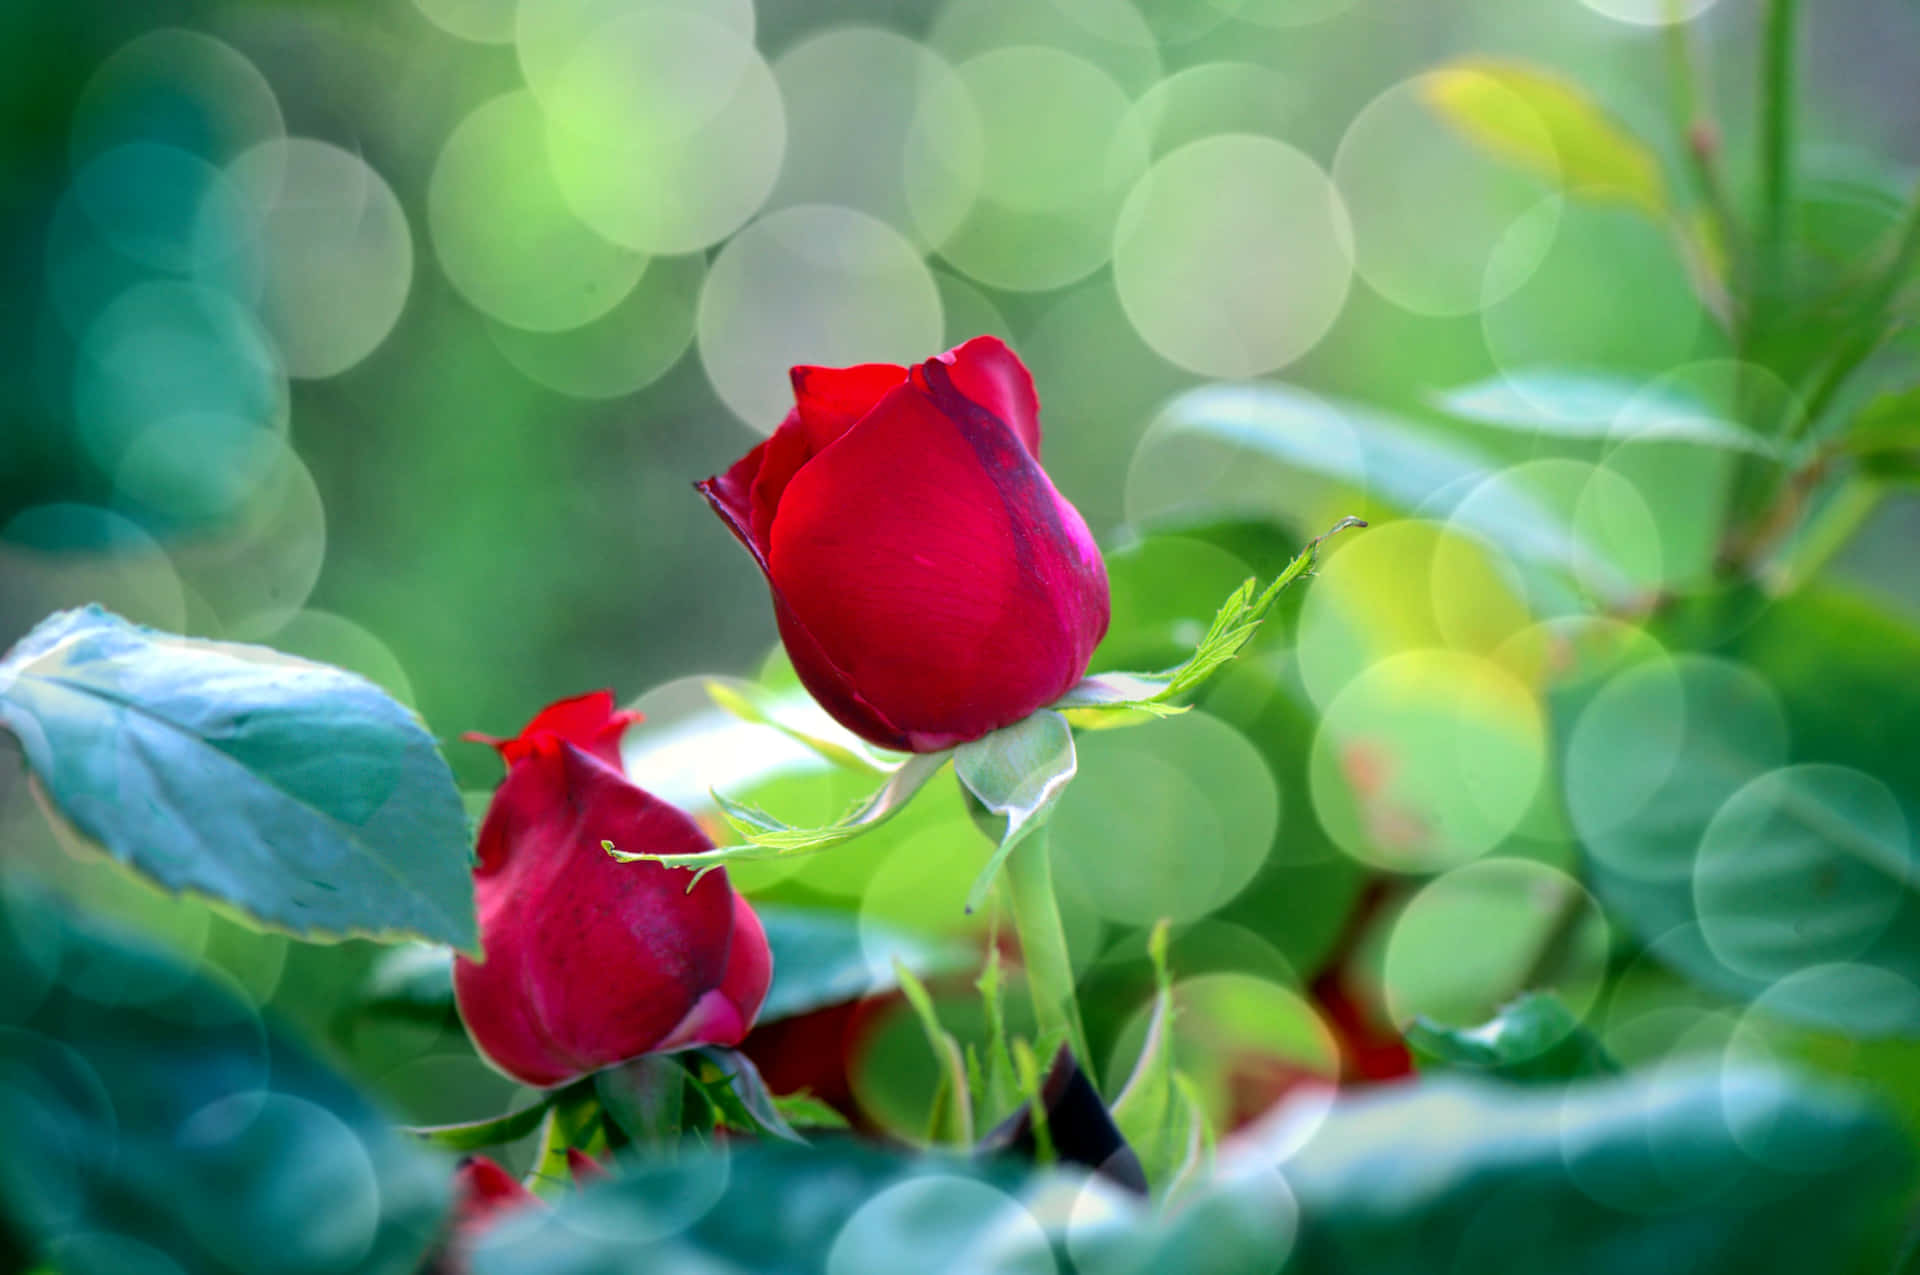 "A beautiful bouquet of red roses shows your love this Valentine's Day." Wallpaper